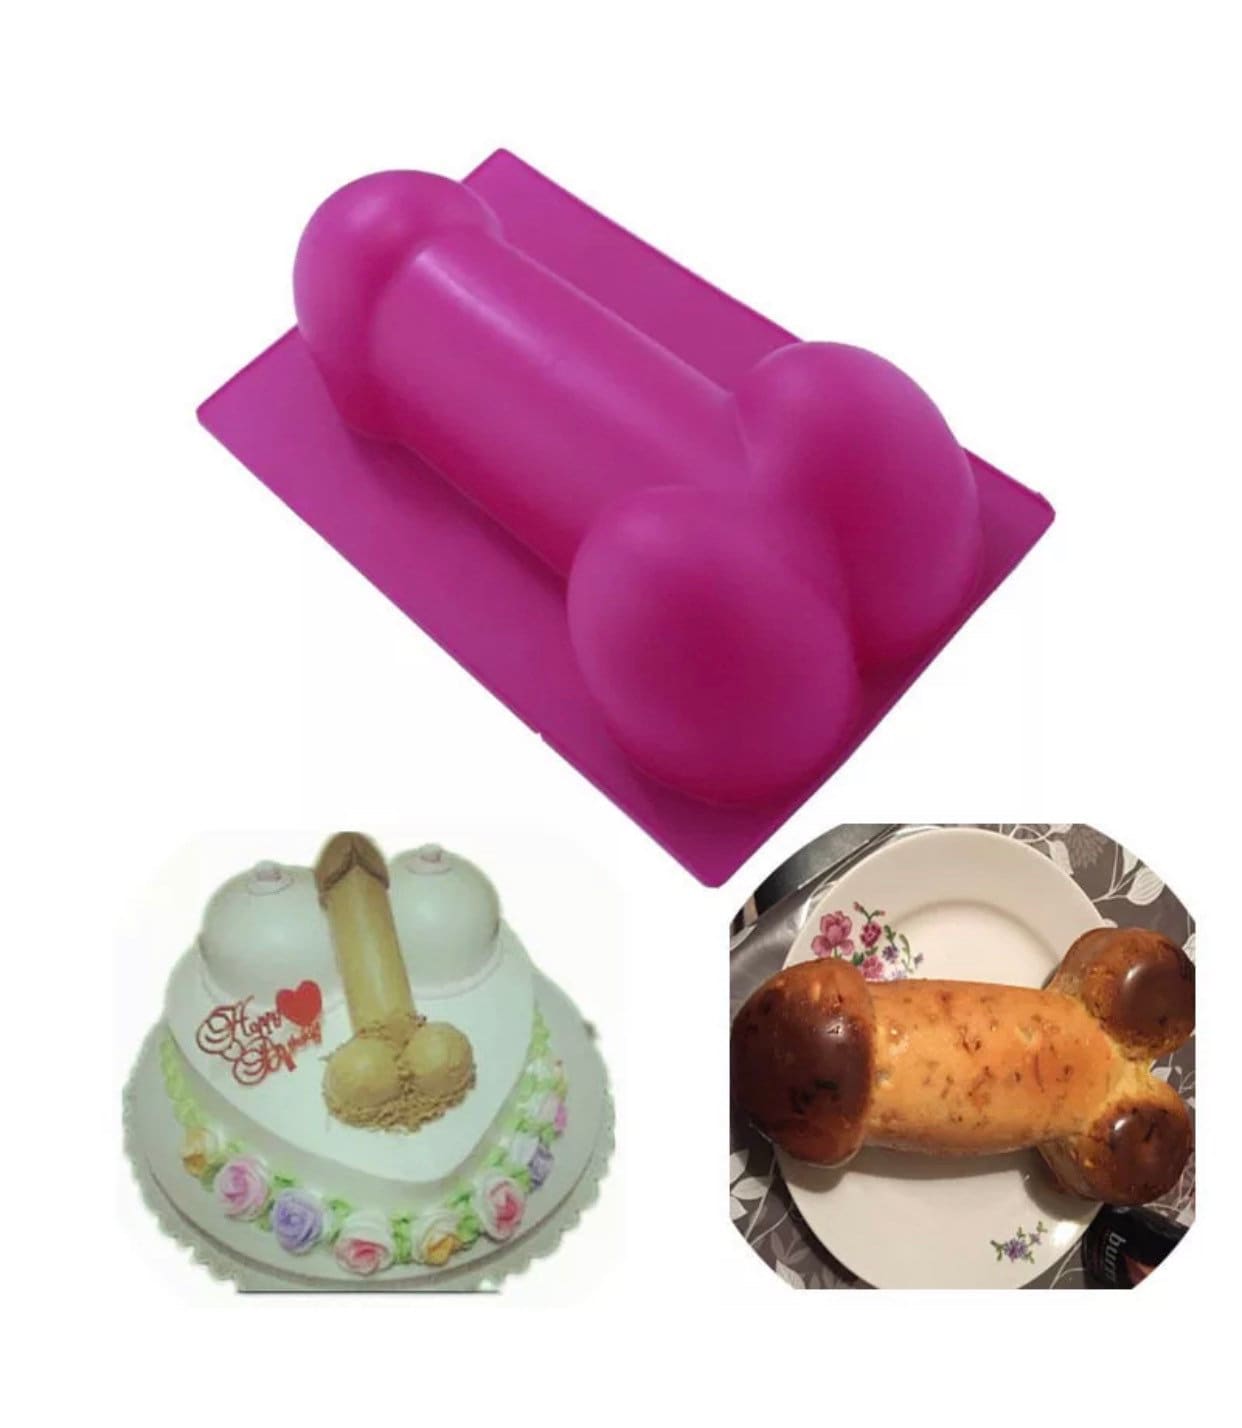 Large bachelorette Party Silicone Penis Cake Mold Chocolate 10